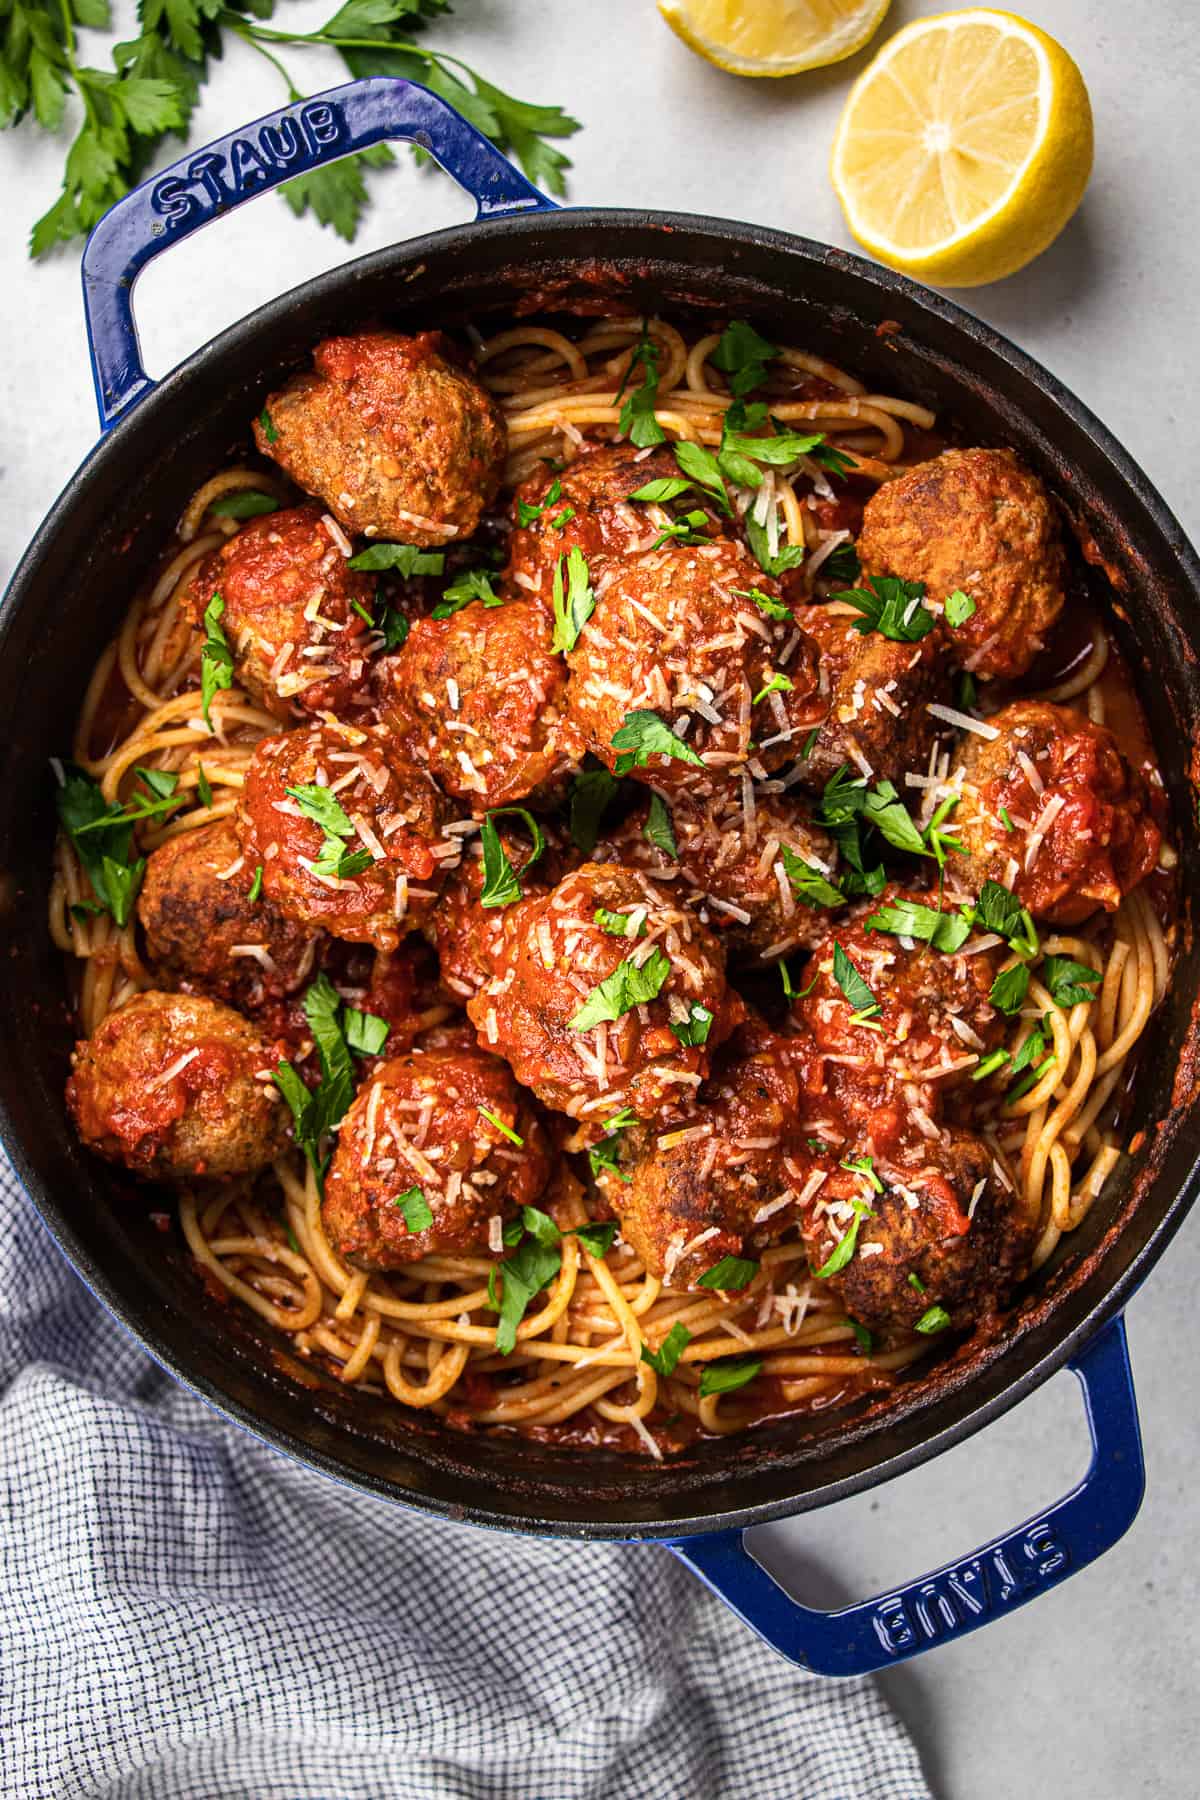 Spaghetti with meatballs, topped with parmesan and chopped parsley, in Dutch Oven.